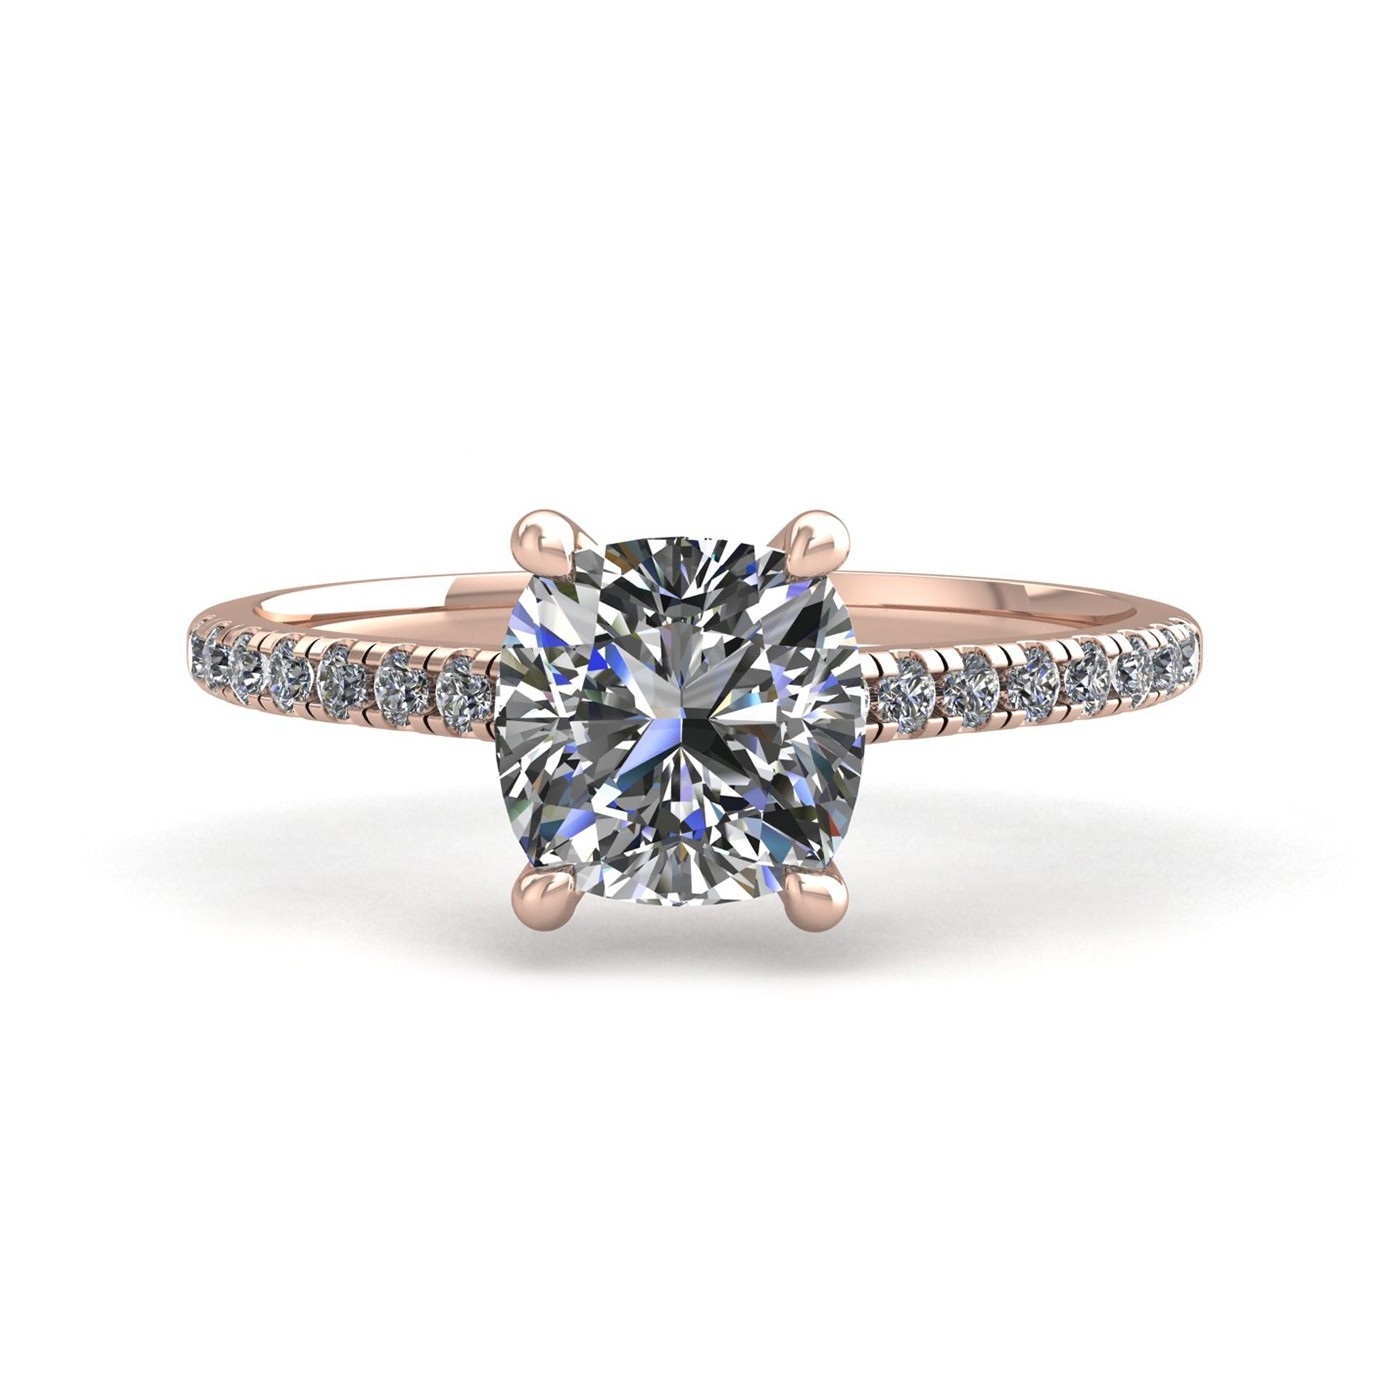 18k rose gold 2.5ct 4 prongs cushion cut diamond engagement ring with whisper thin pavÉ set band Photos & images